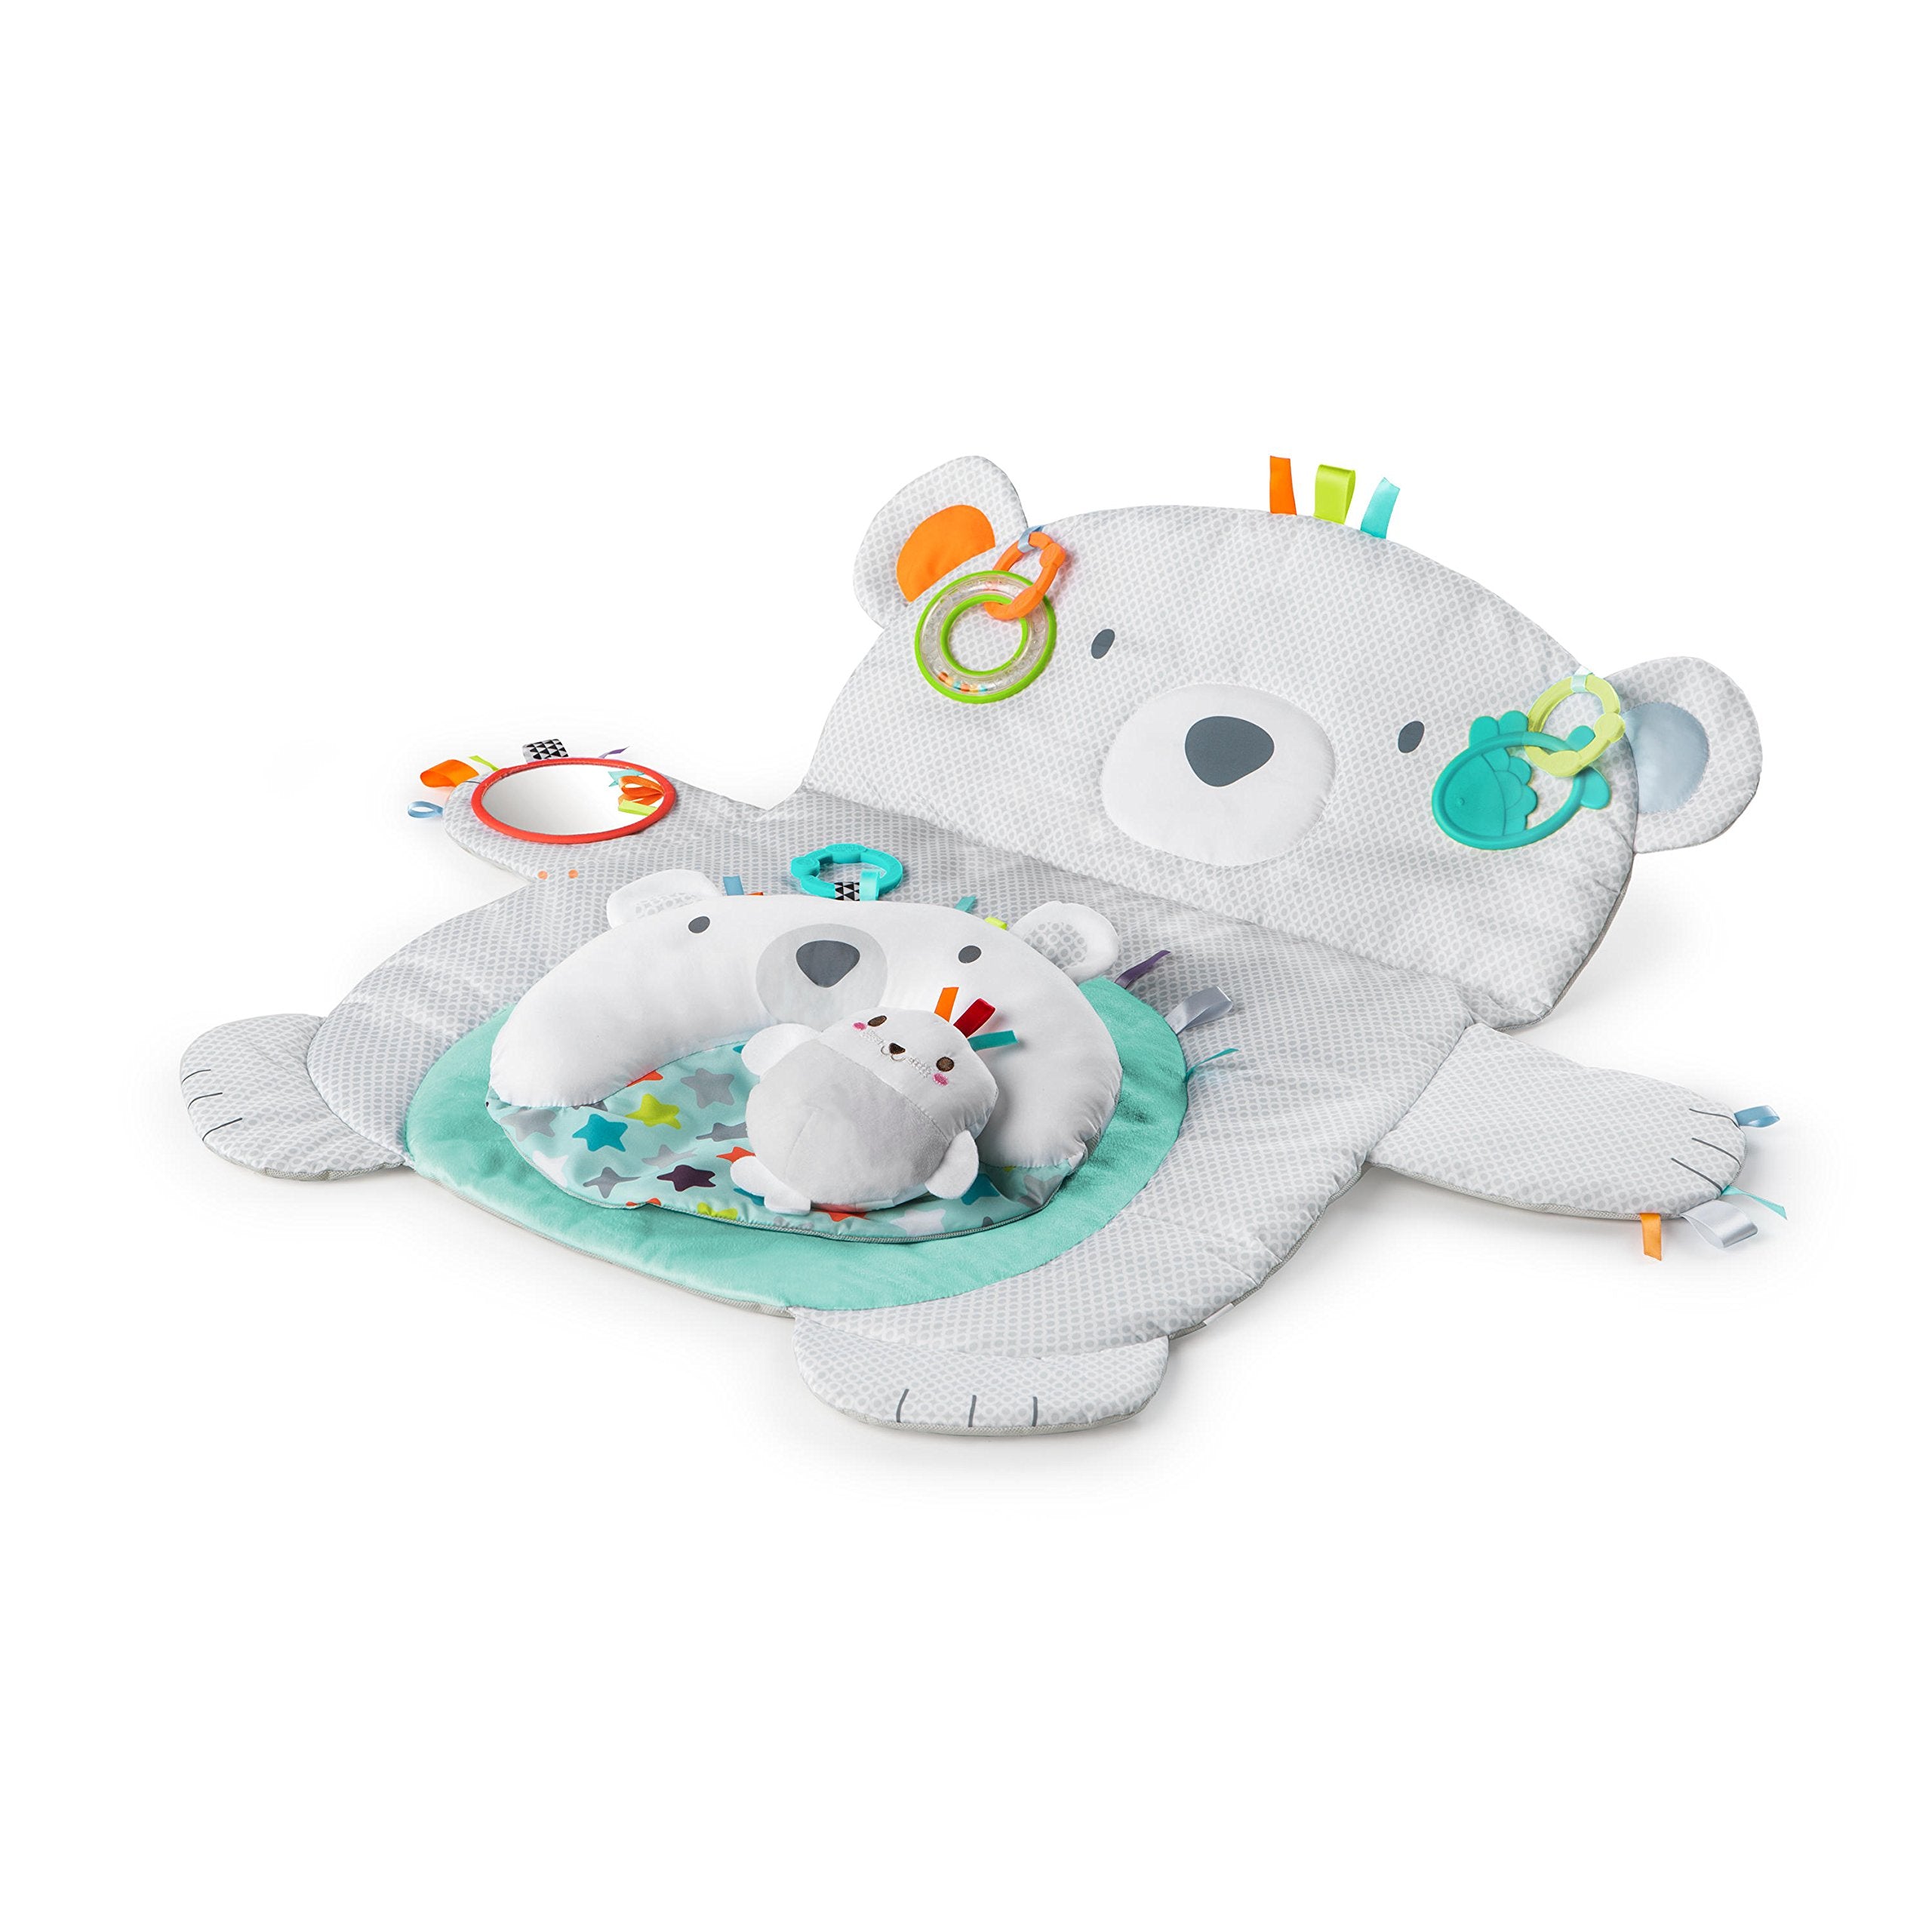 Bright Starts Tummy Time Prop and Play Toy Set